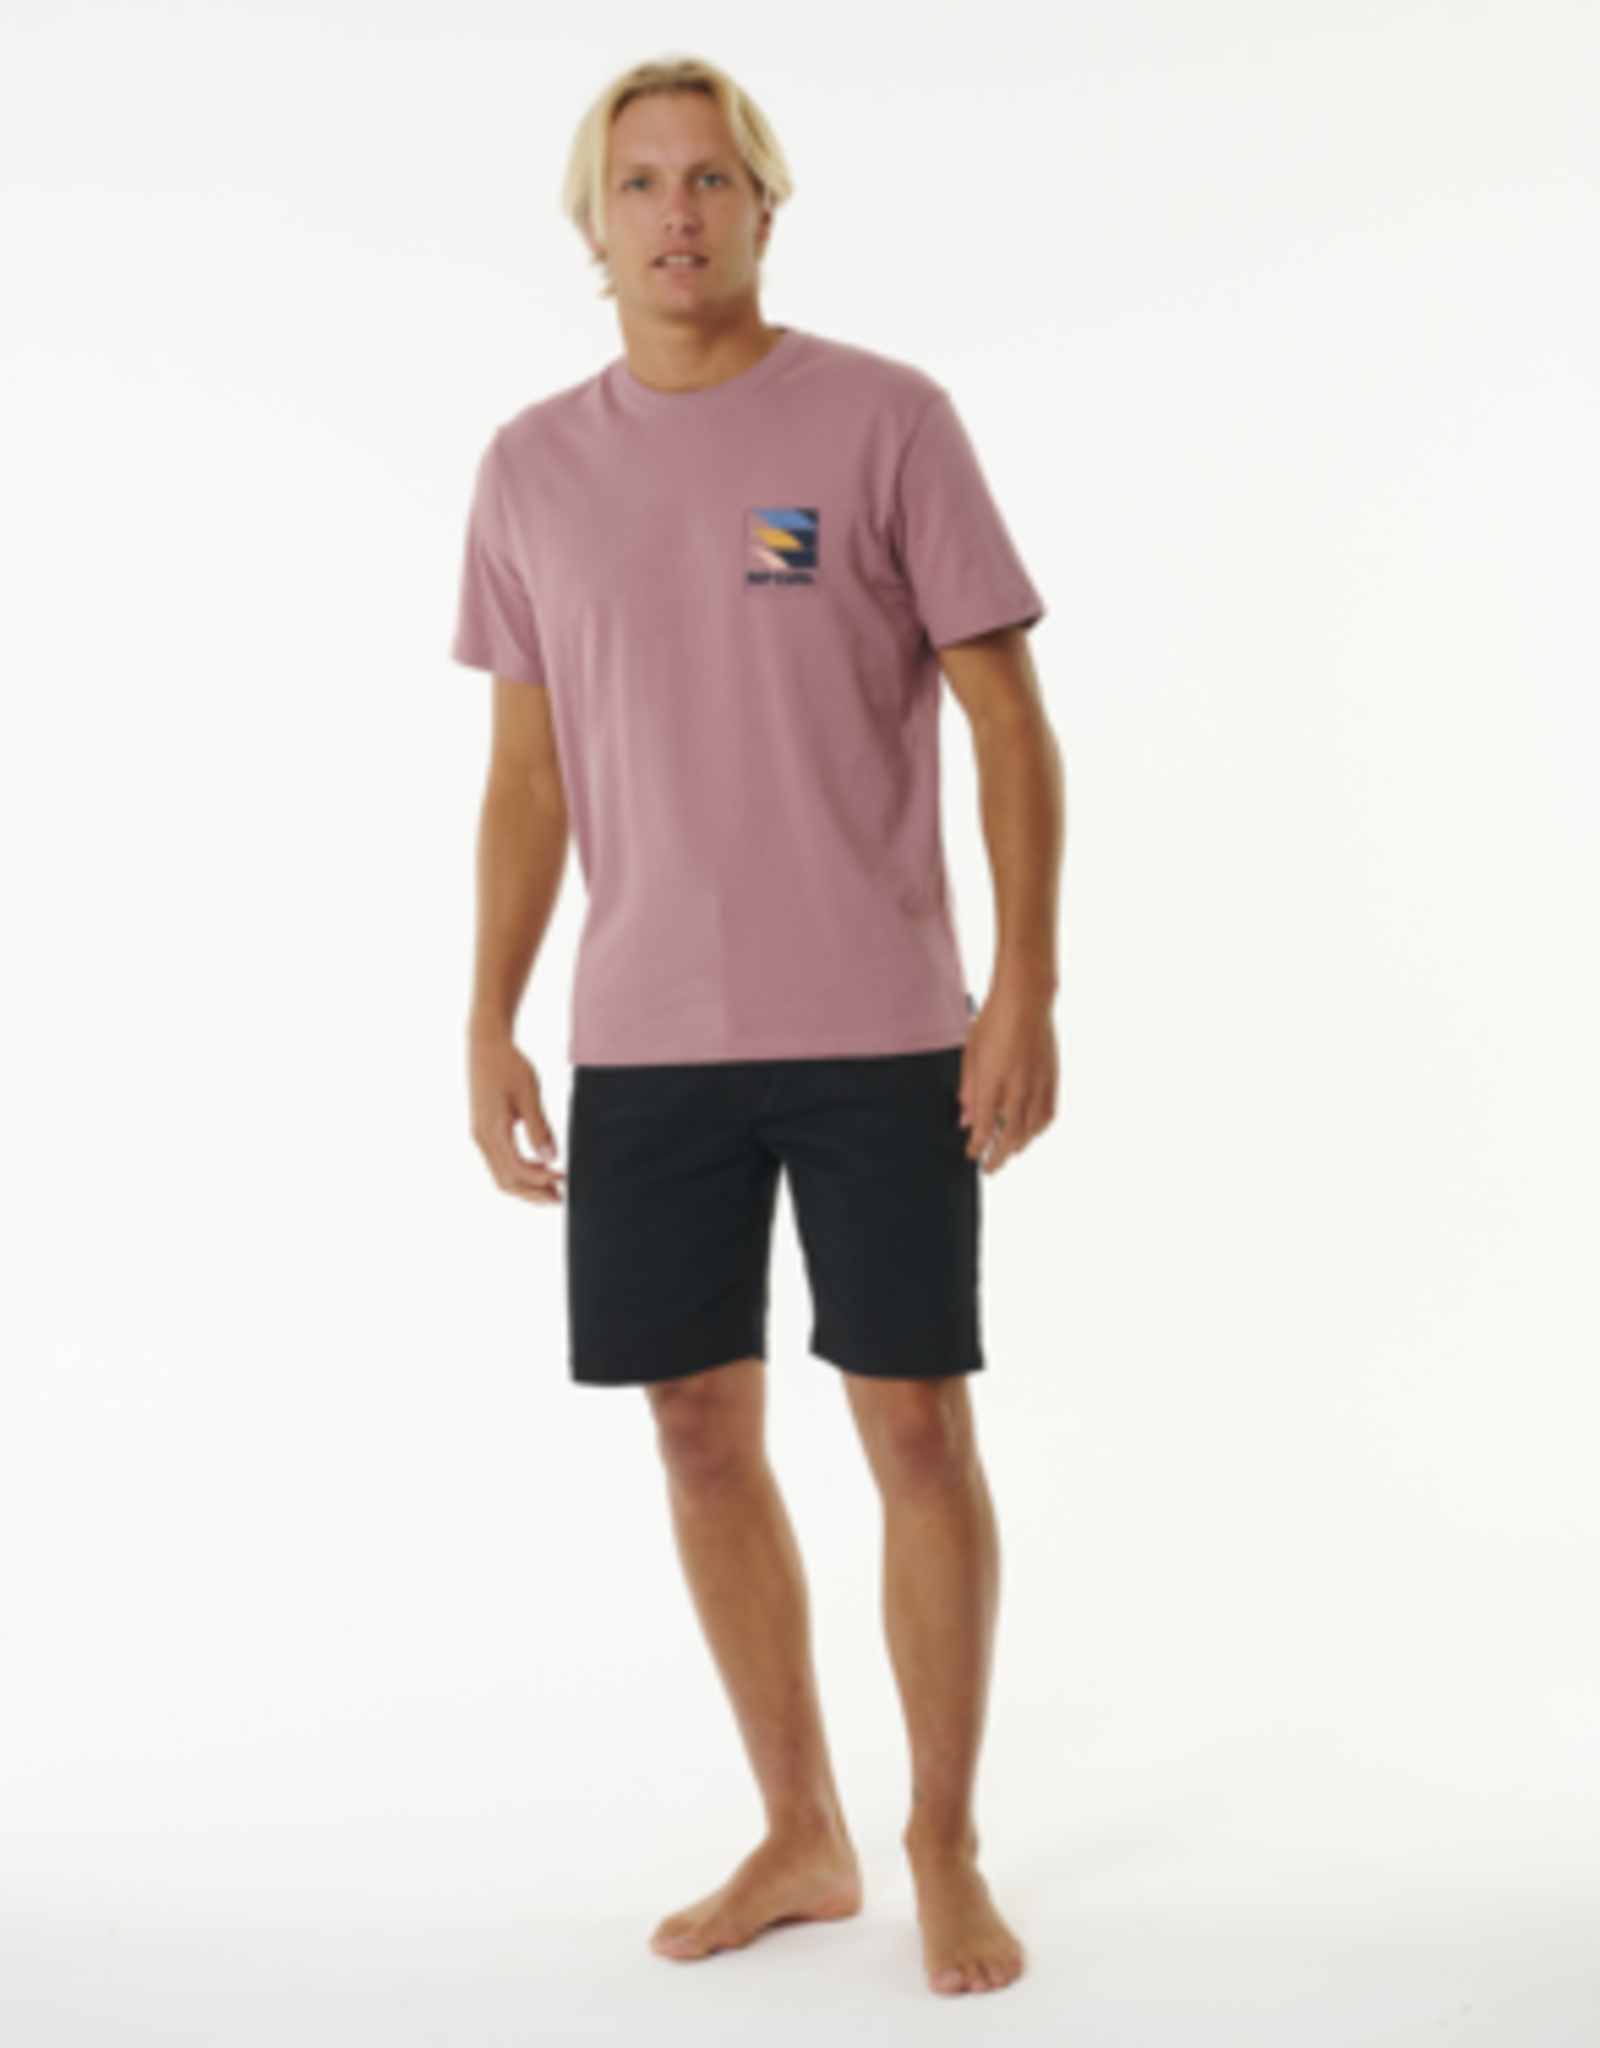 RIPCURL SURF REVIVAL LINE UP TEE